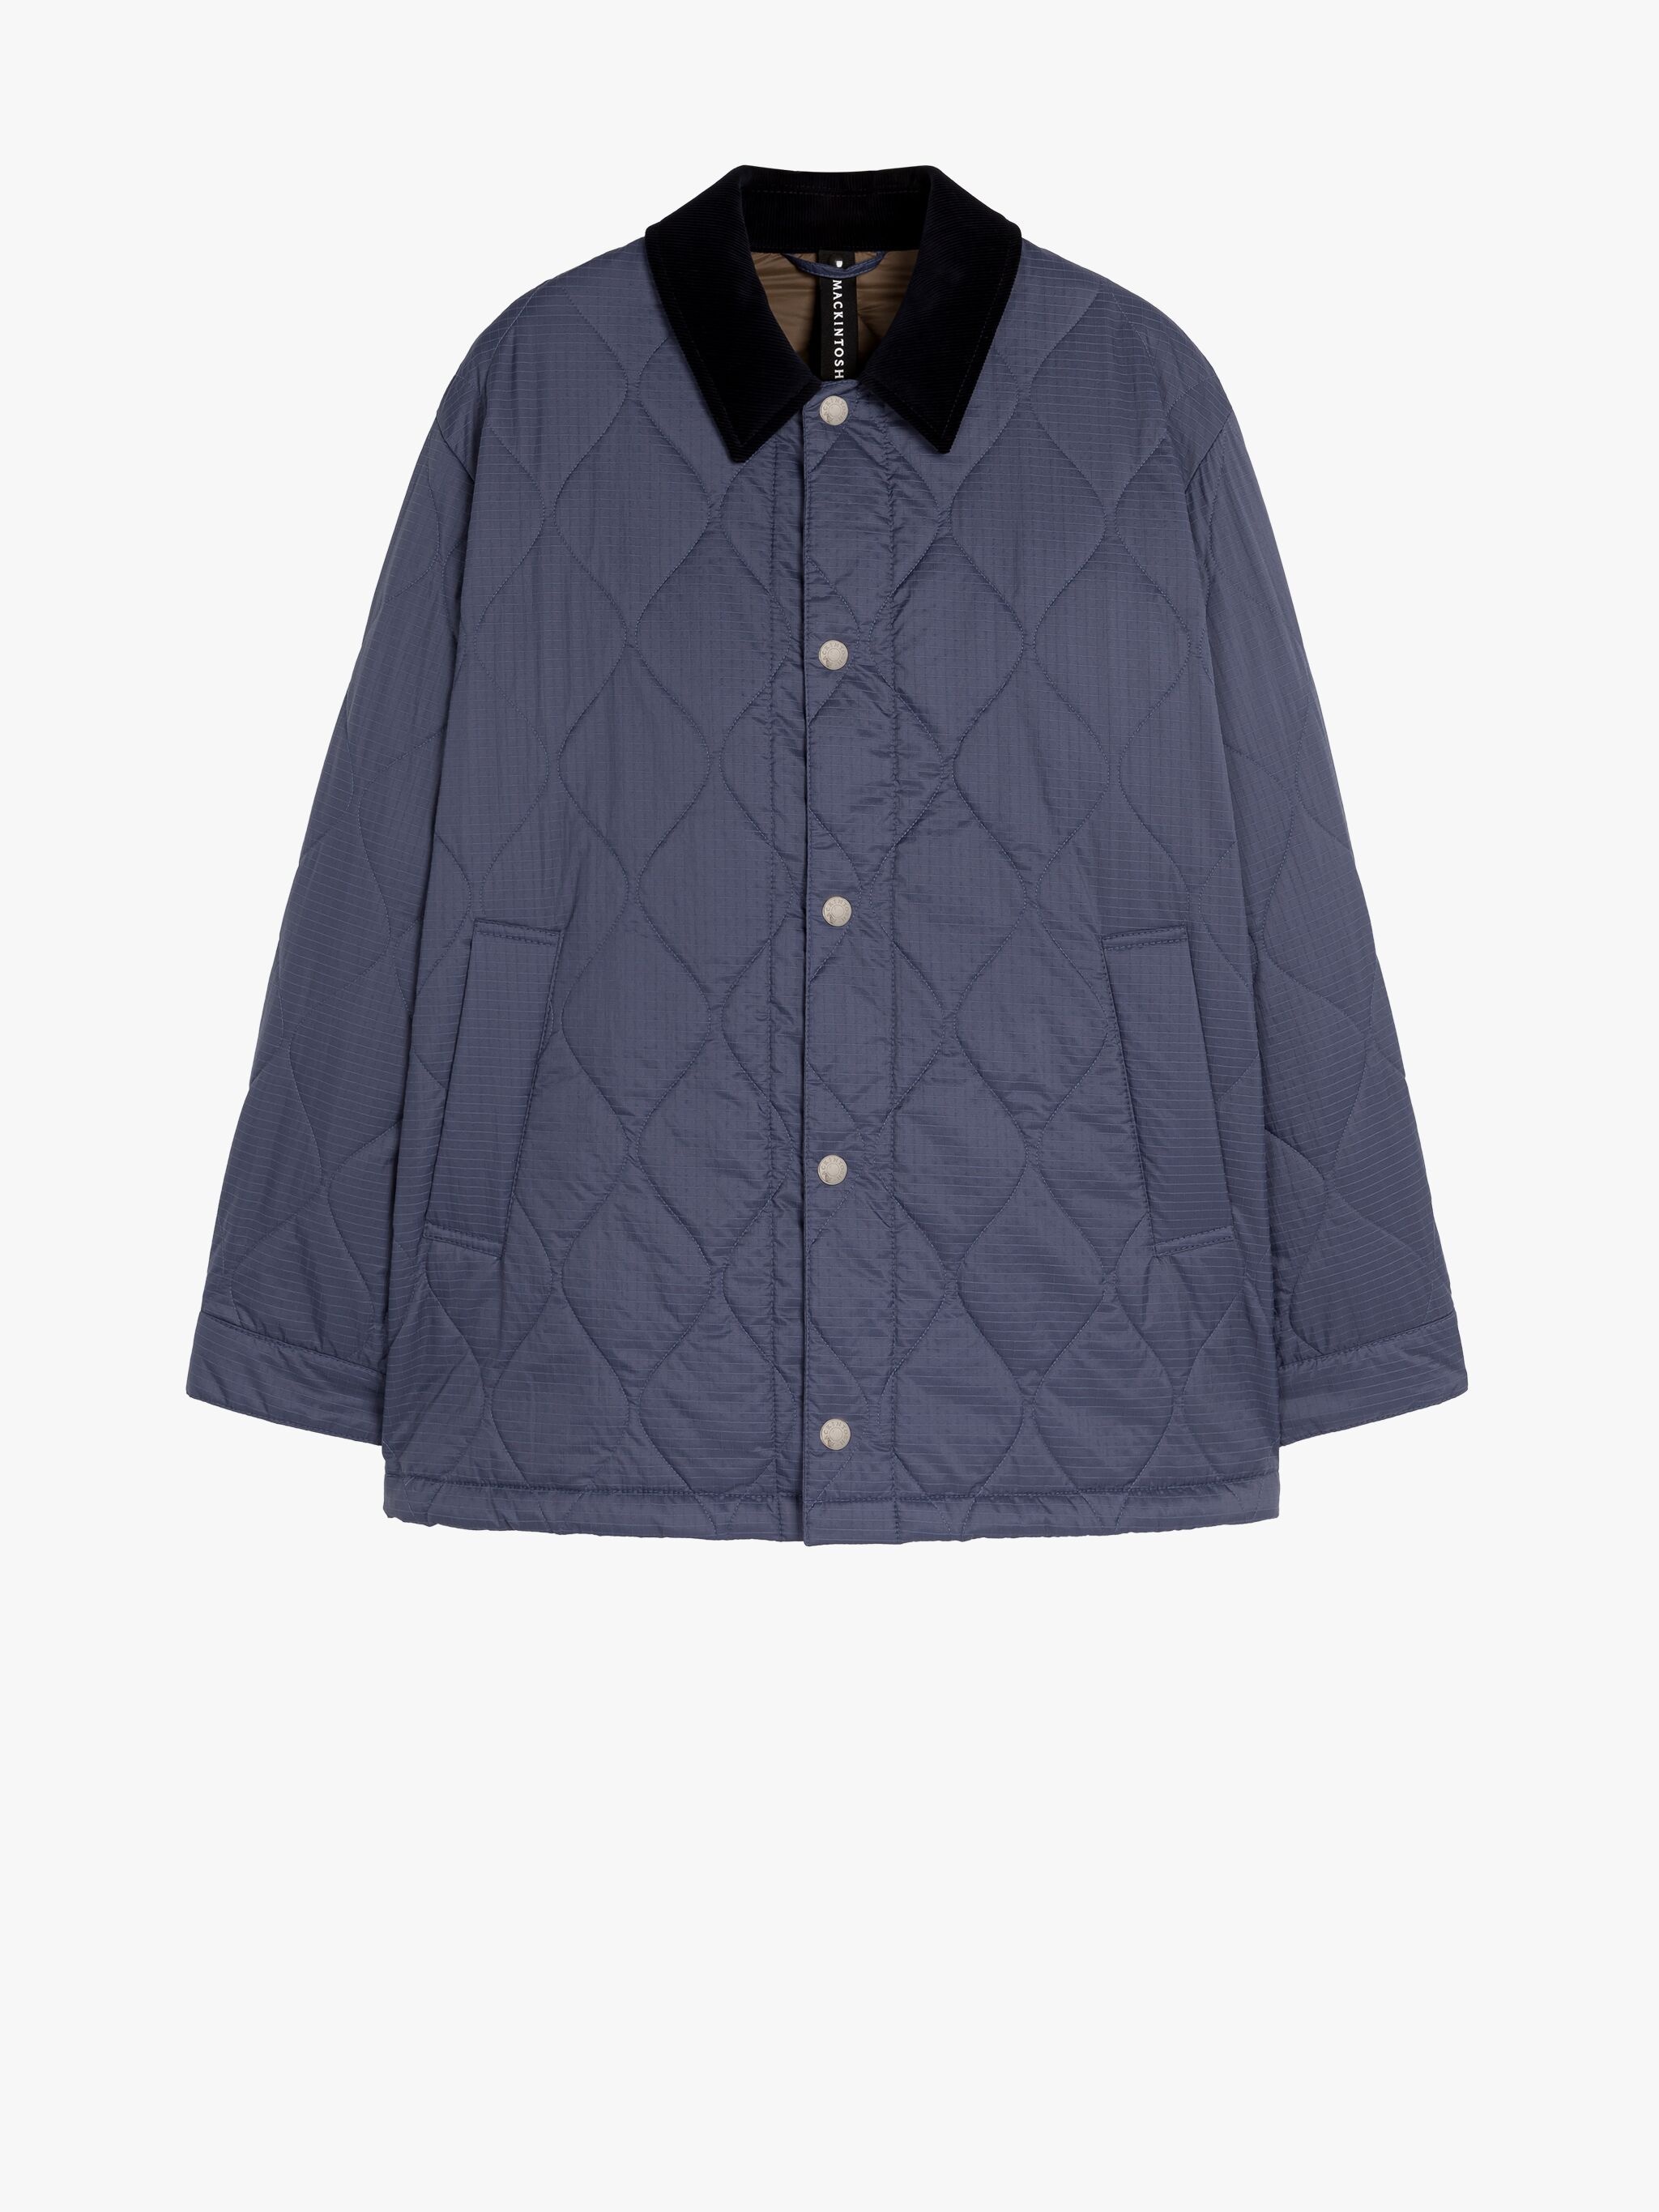 TEEMING NAVY NYLON QUILTED COACH JACKET - 1